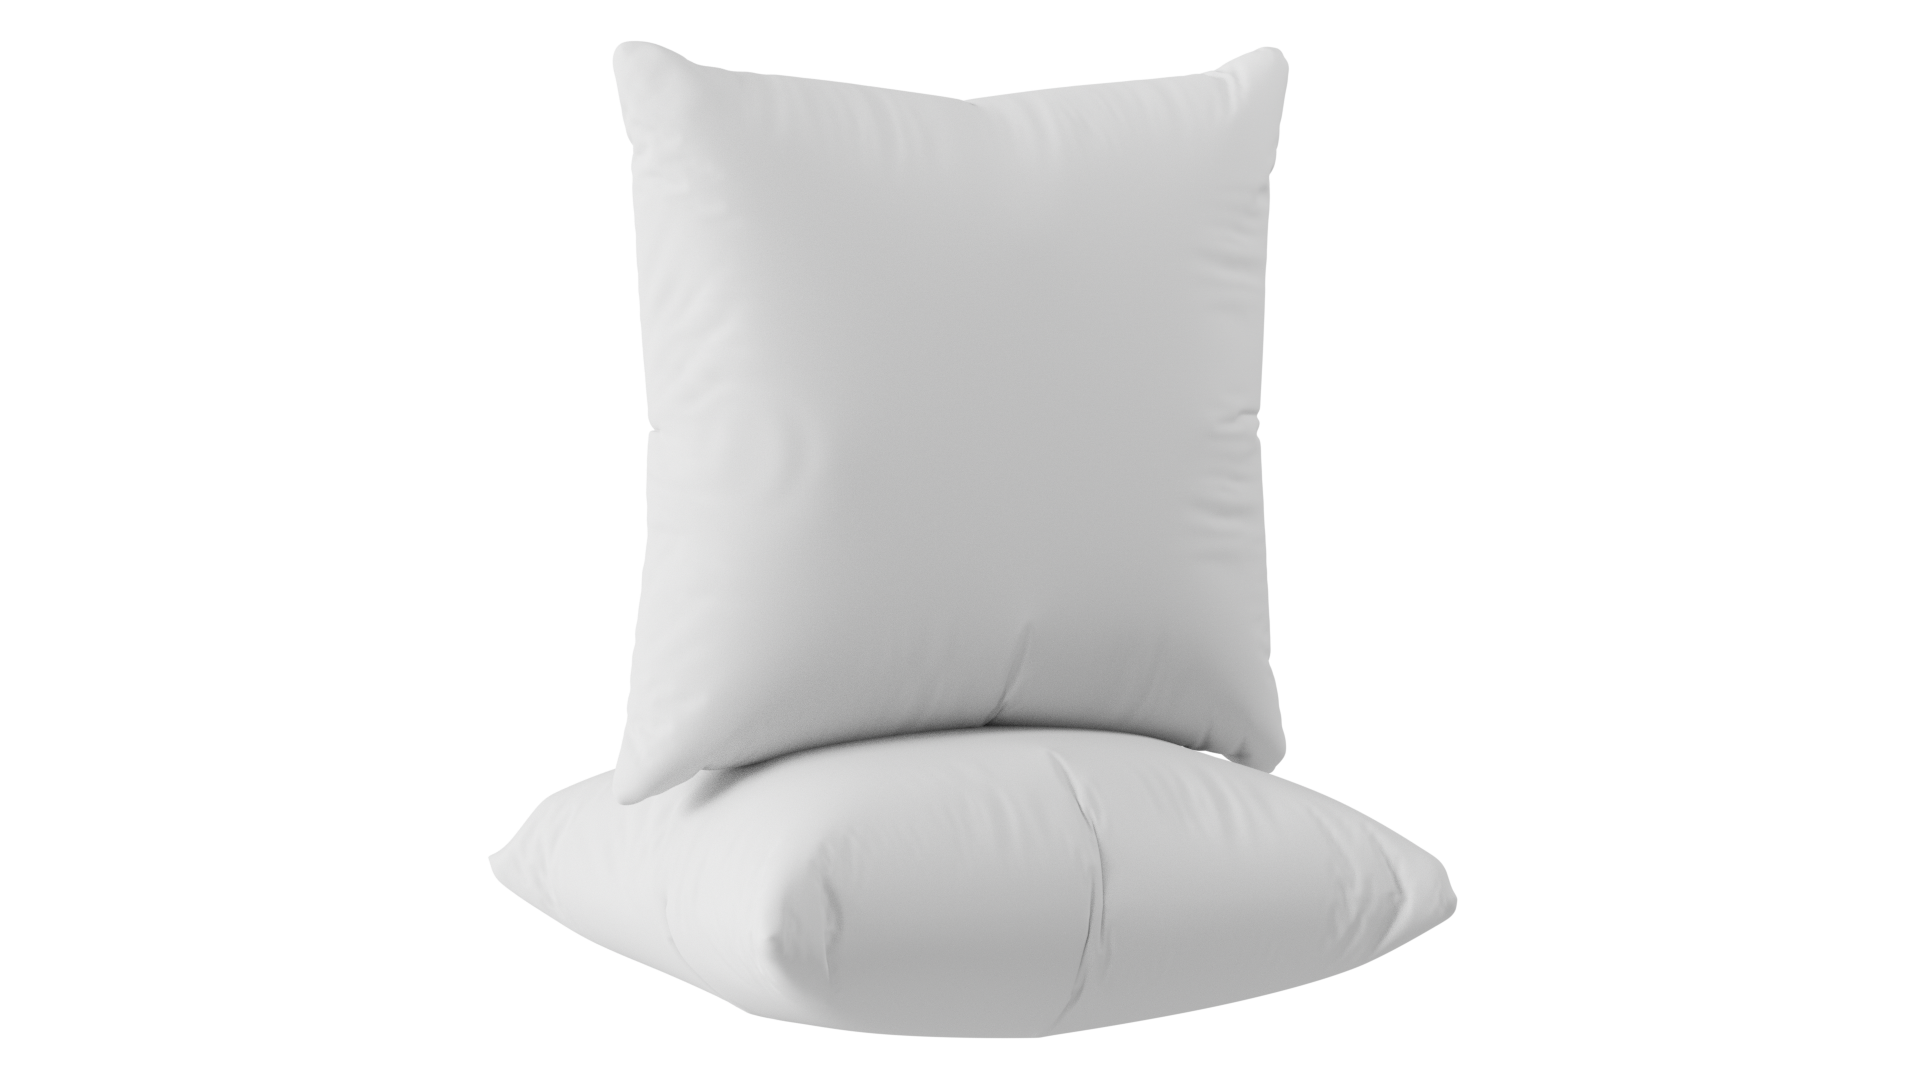 Utopia Bedding Throw Pillows (Set of 24, White), 20 x 20 Inches Pillows for  Sofa, Bed and Couch Decorative Stuffer Pillows